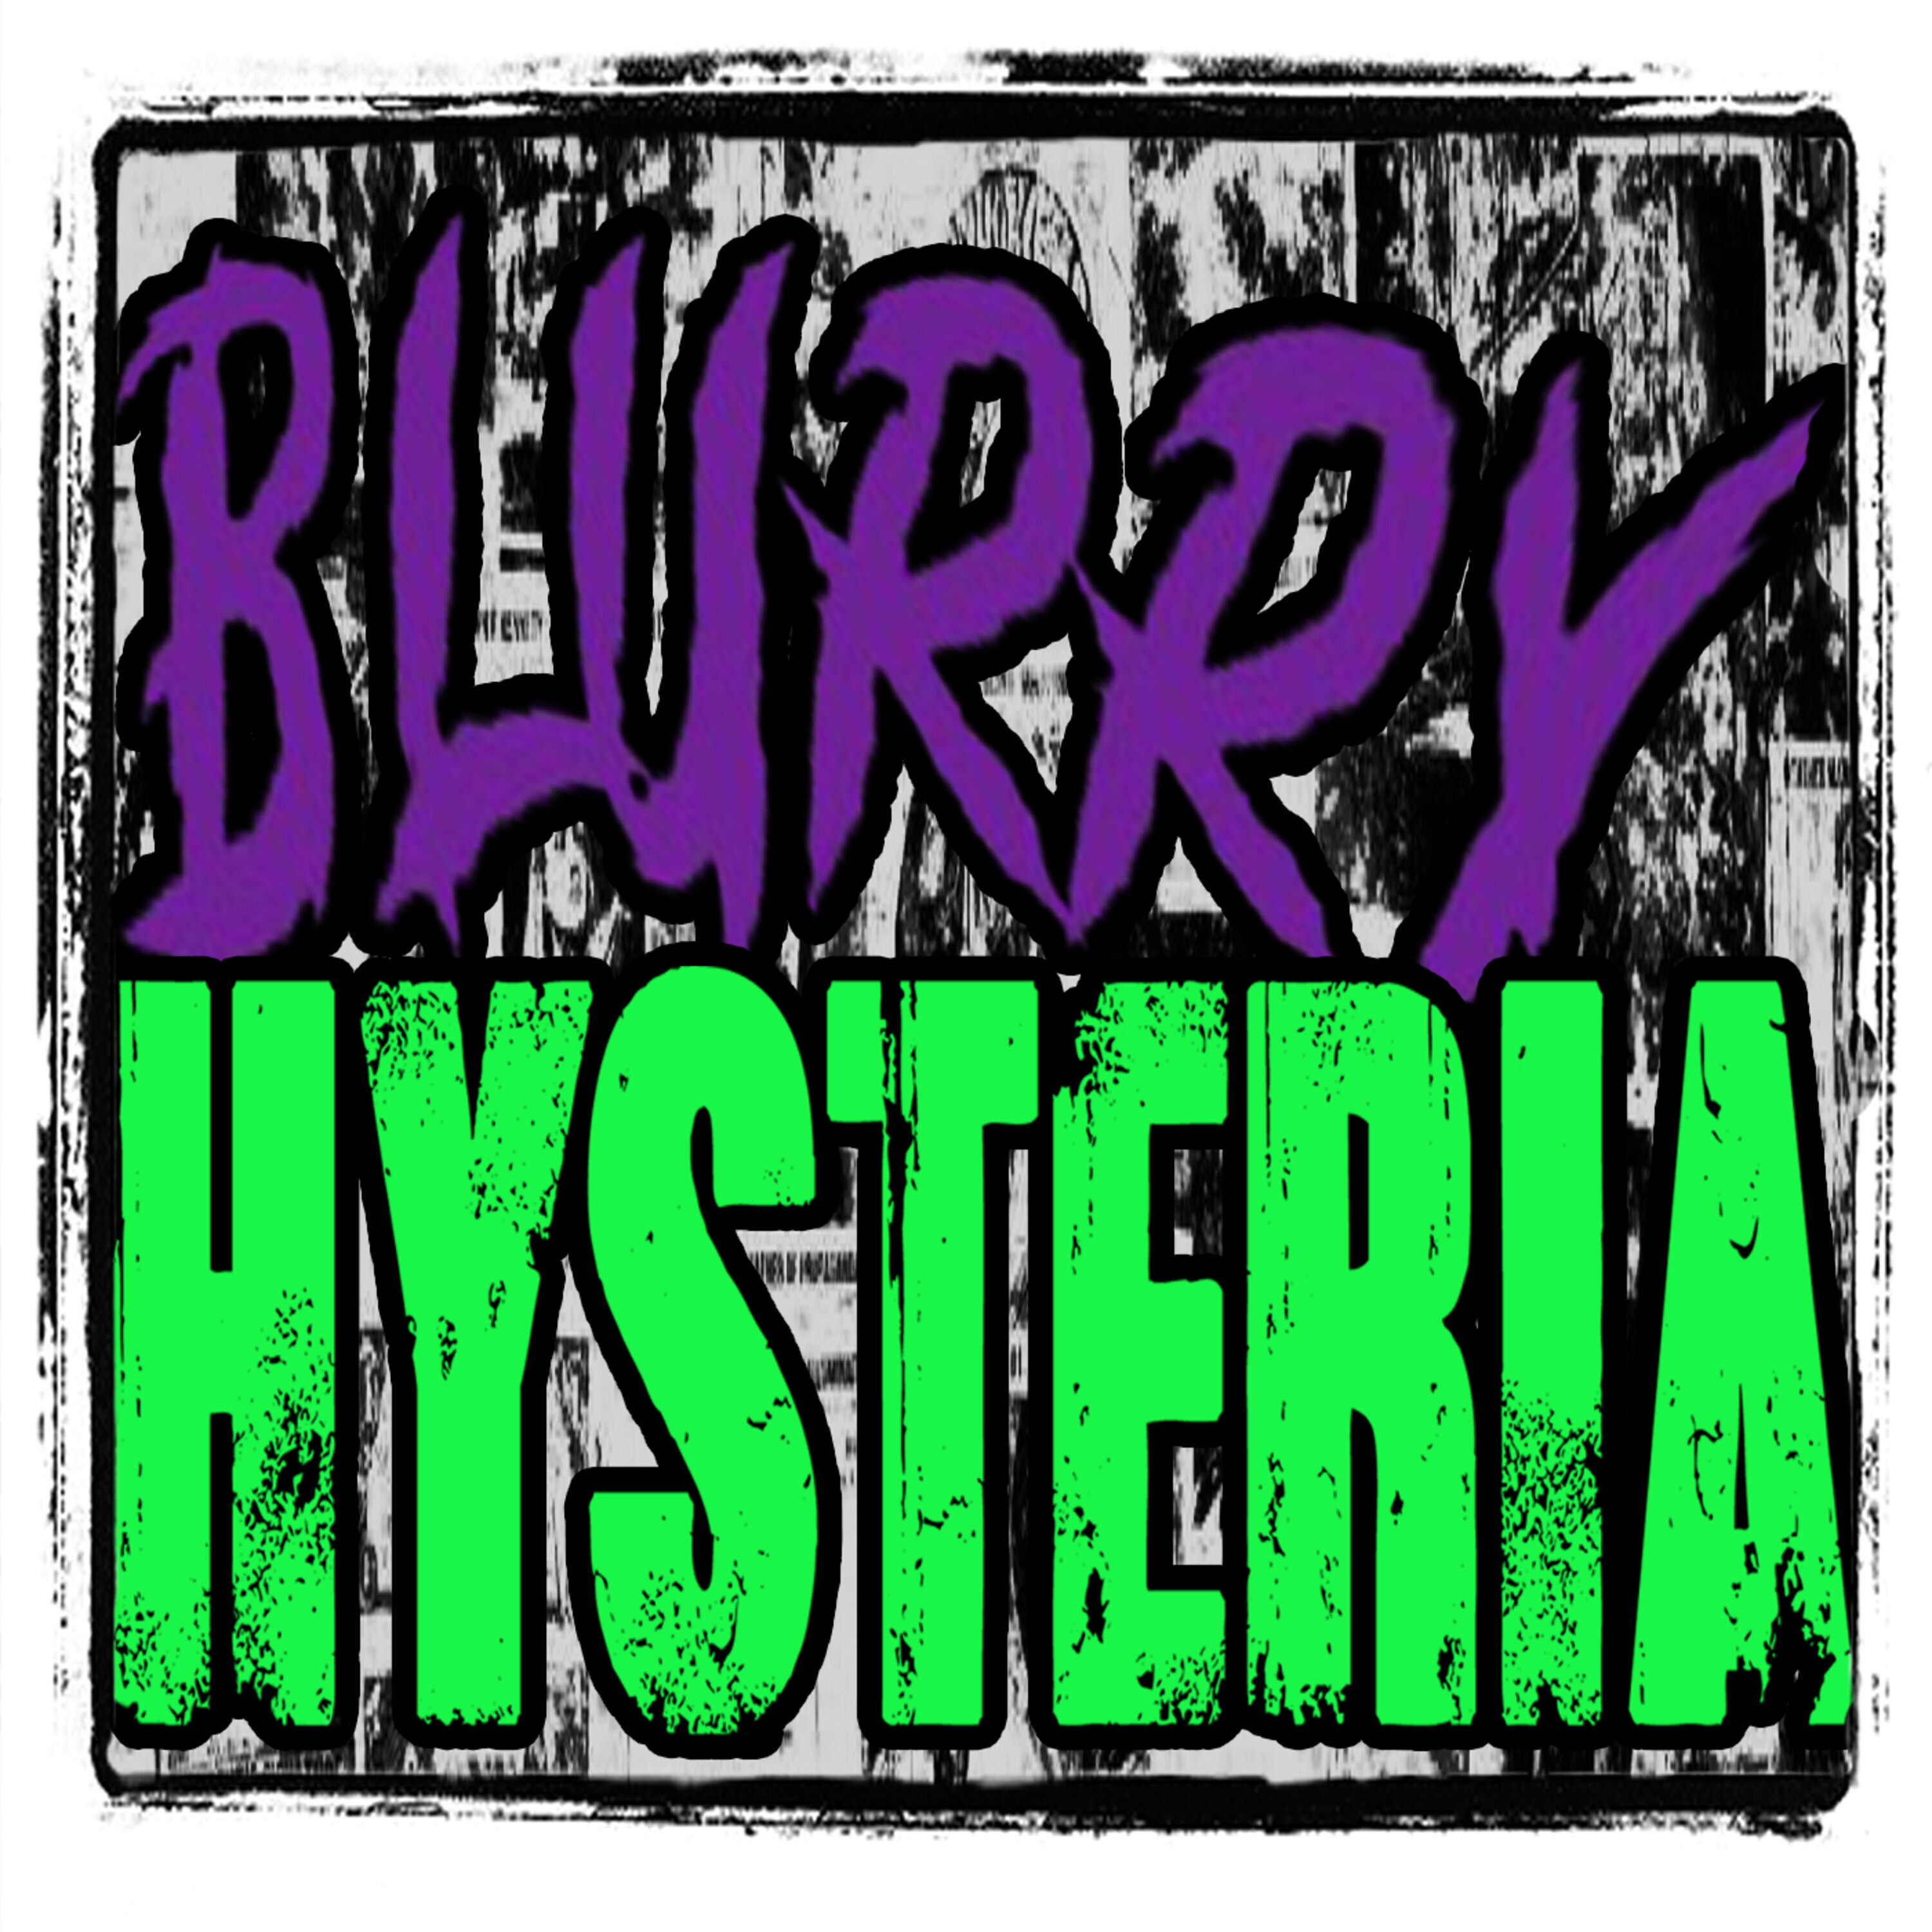 Blurry Hysteria 5: Dry Mead Pits Image